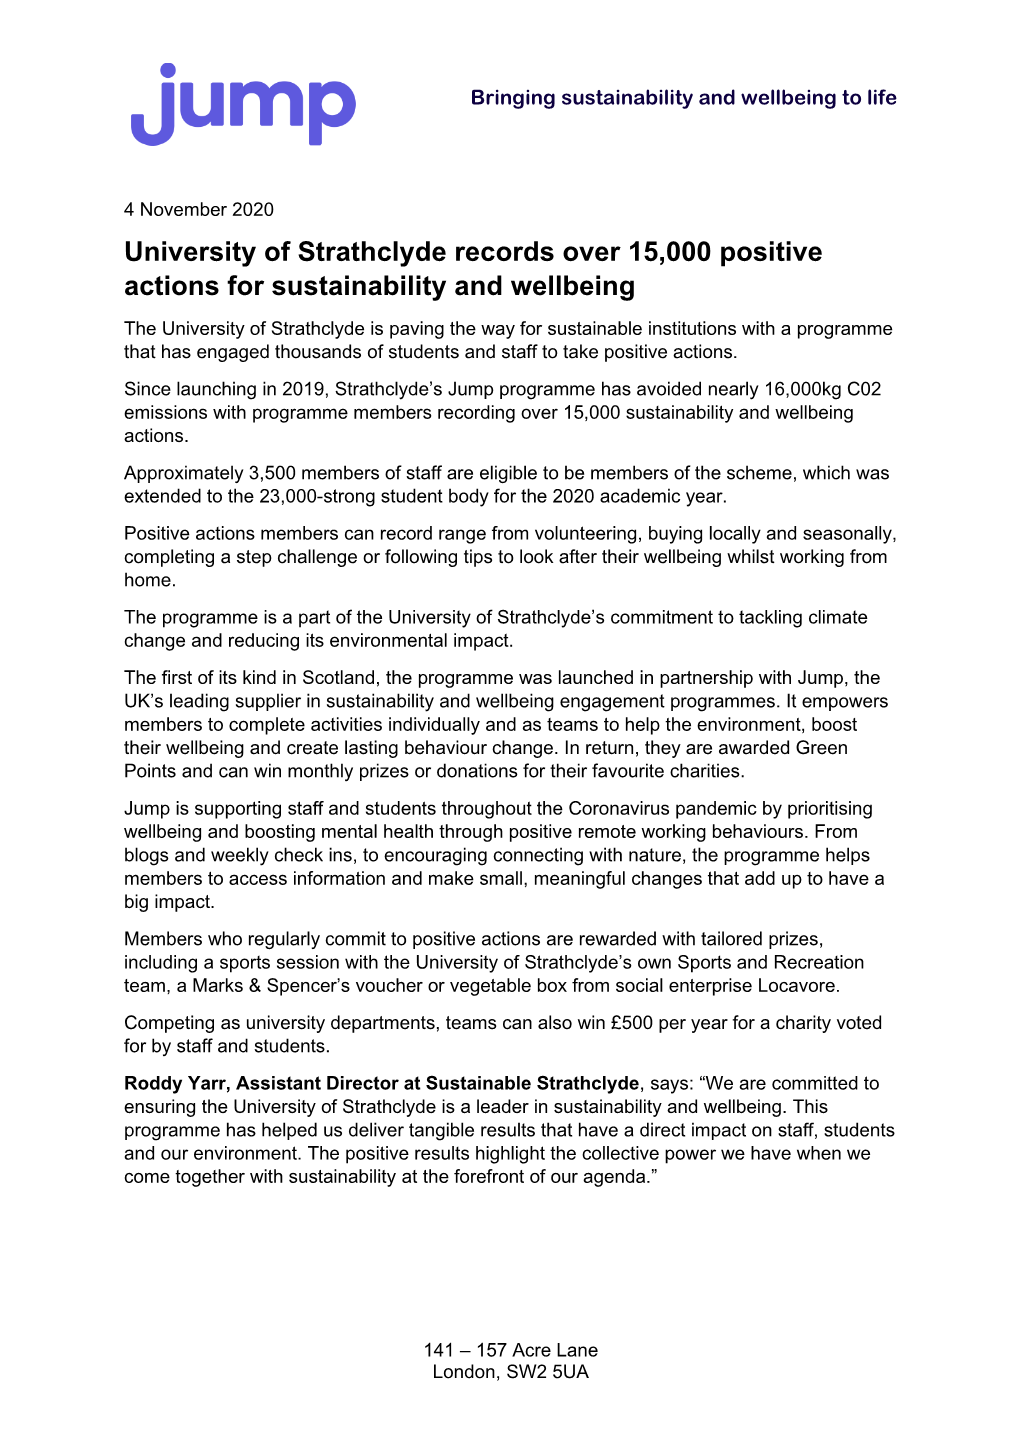 University of Strathclyde Records Over 15,000 Positive Actions for Sustainability and Wellbeing